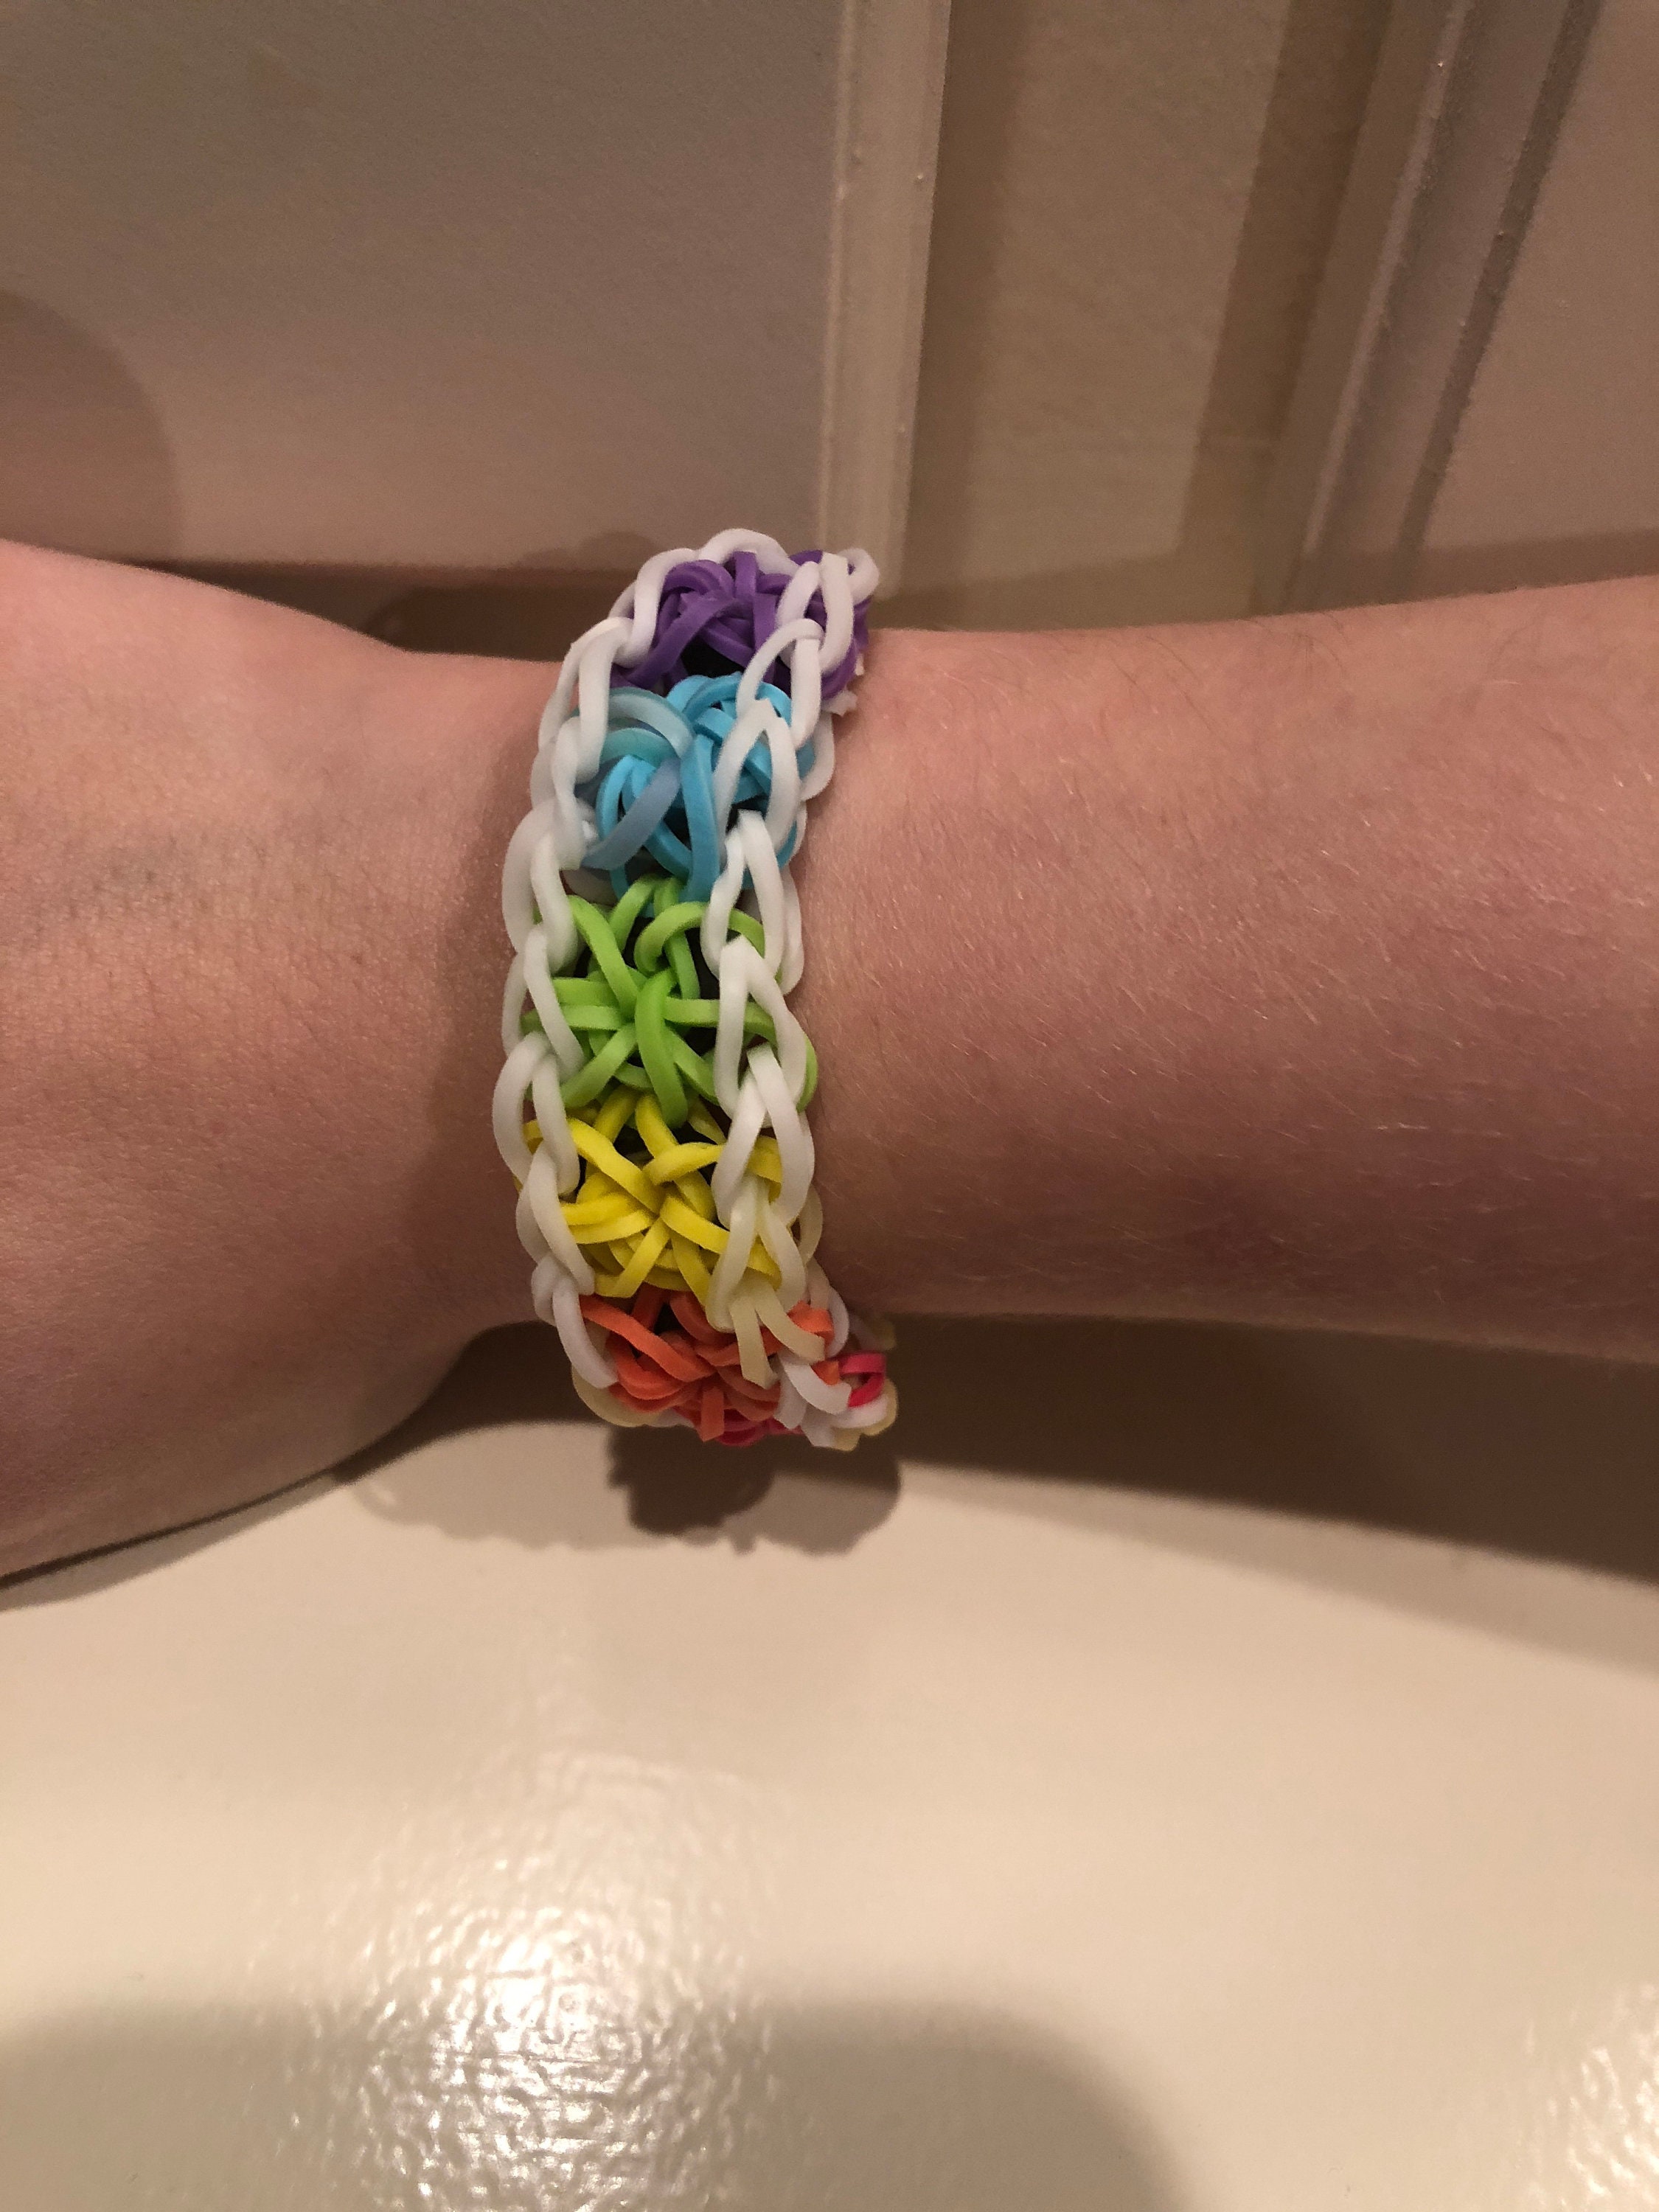 Rainbow Tire Track Black and White Rainbow Loom Rubber Band